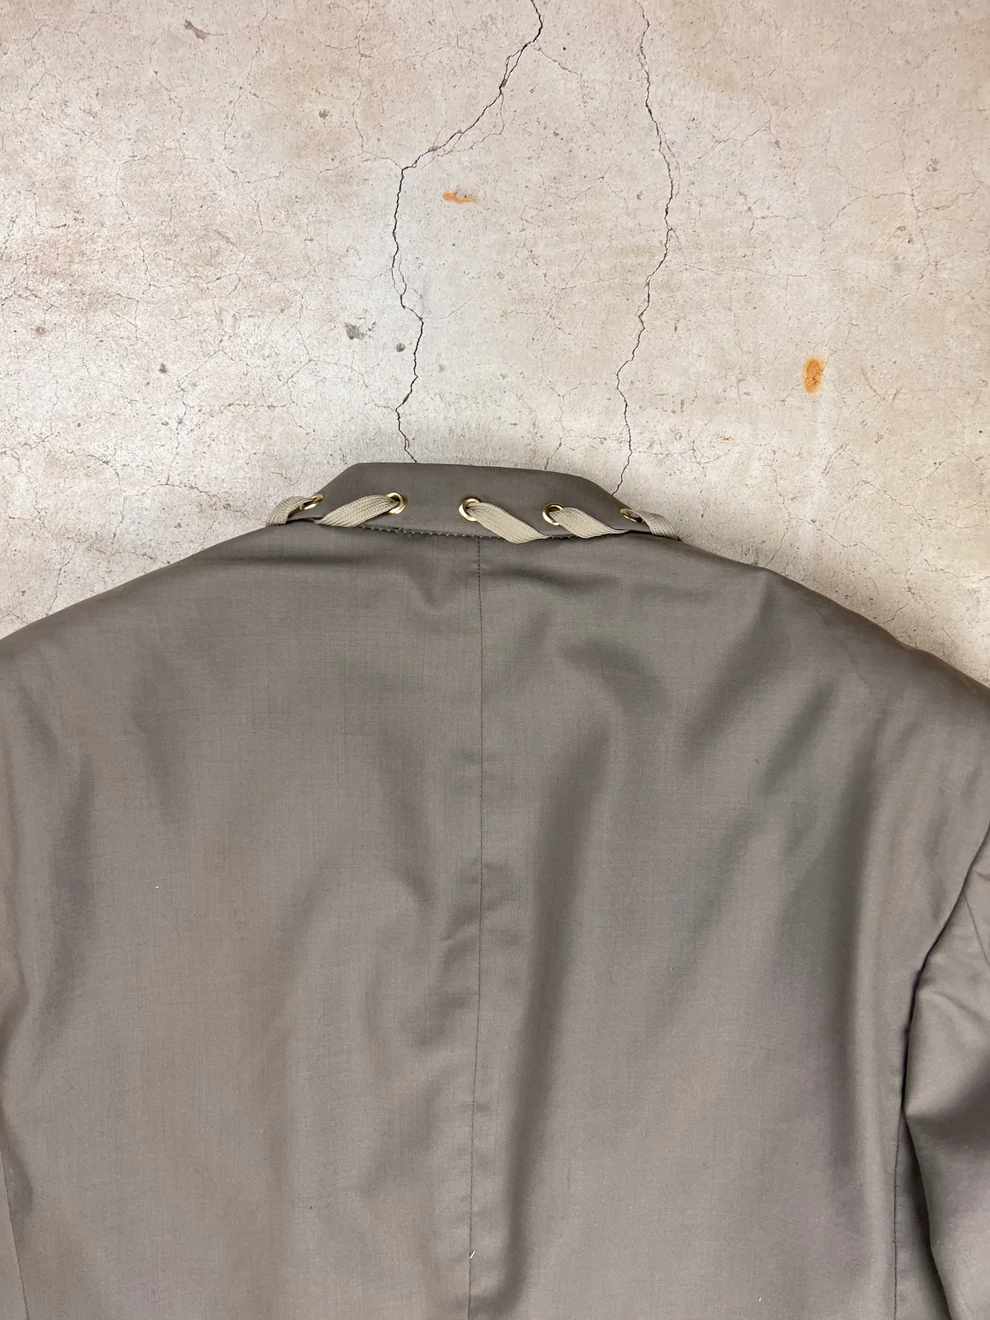 a man's jacket hanging up against a wall.